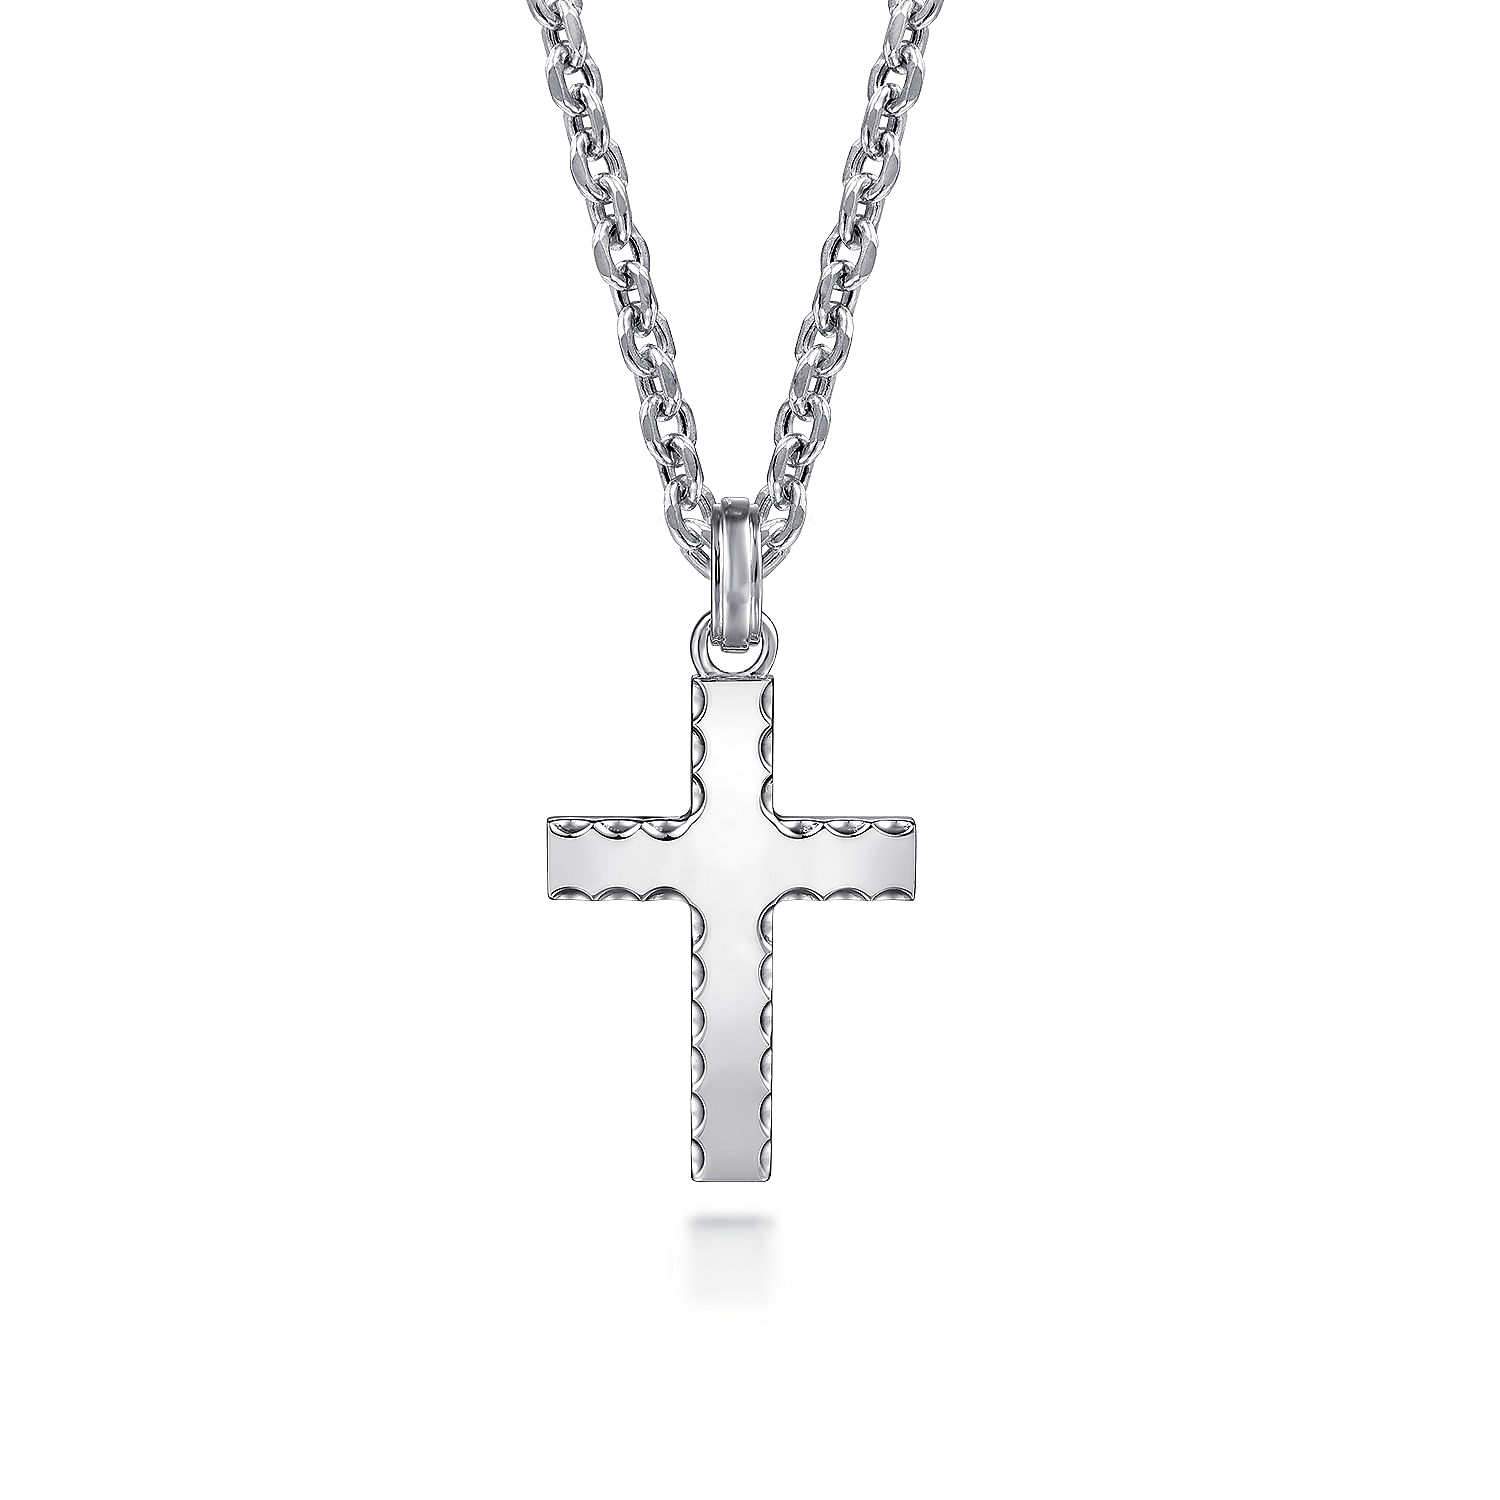 Gabriel - 22 Inch 925 Sterling Silver Cross Link Chain Necklace with Beveled Trim